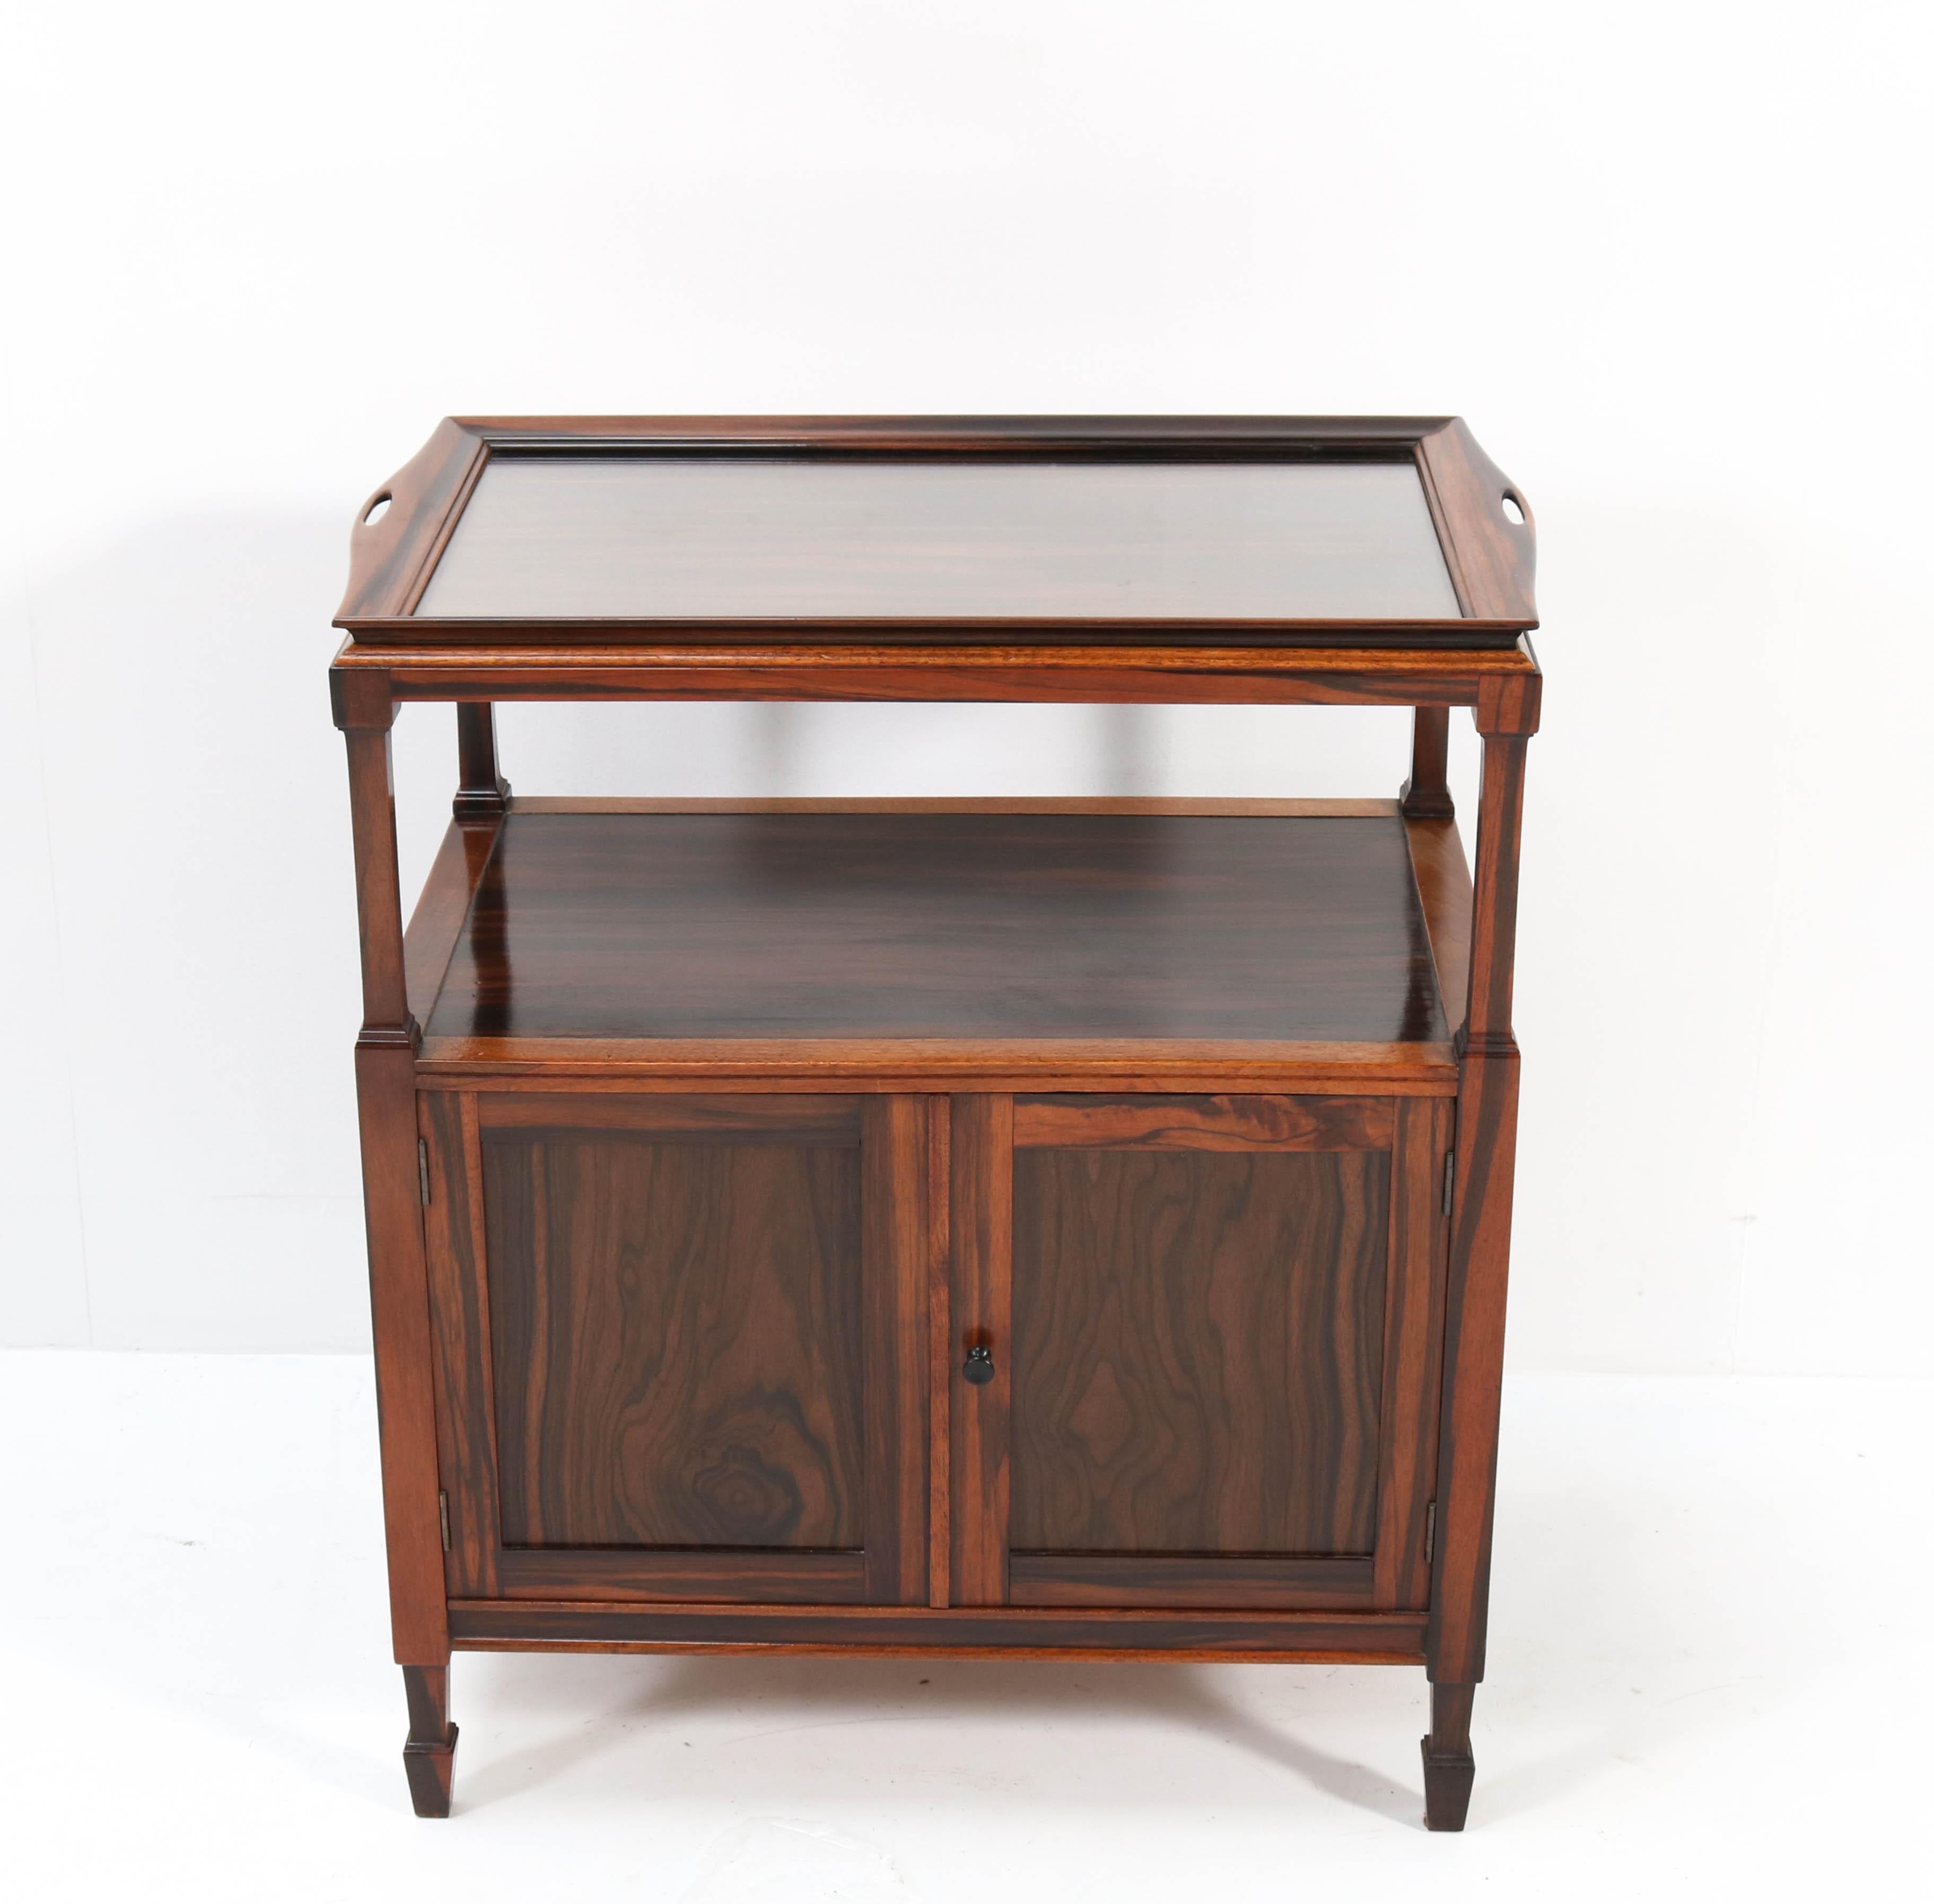 Magnificent and rare Art Deco Amsterdamse School tea cabinet or serving cabinet.
Design by J.J. Zijfers Amsterdam.
Striking Dutch design from the 1920s.
Solid macassar ebony with original serving tray.
Marked with original metal manufacturers